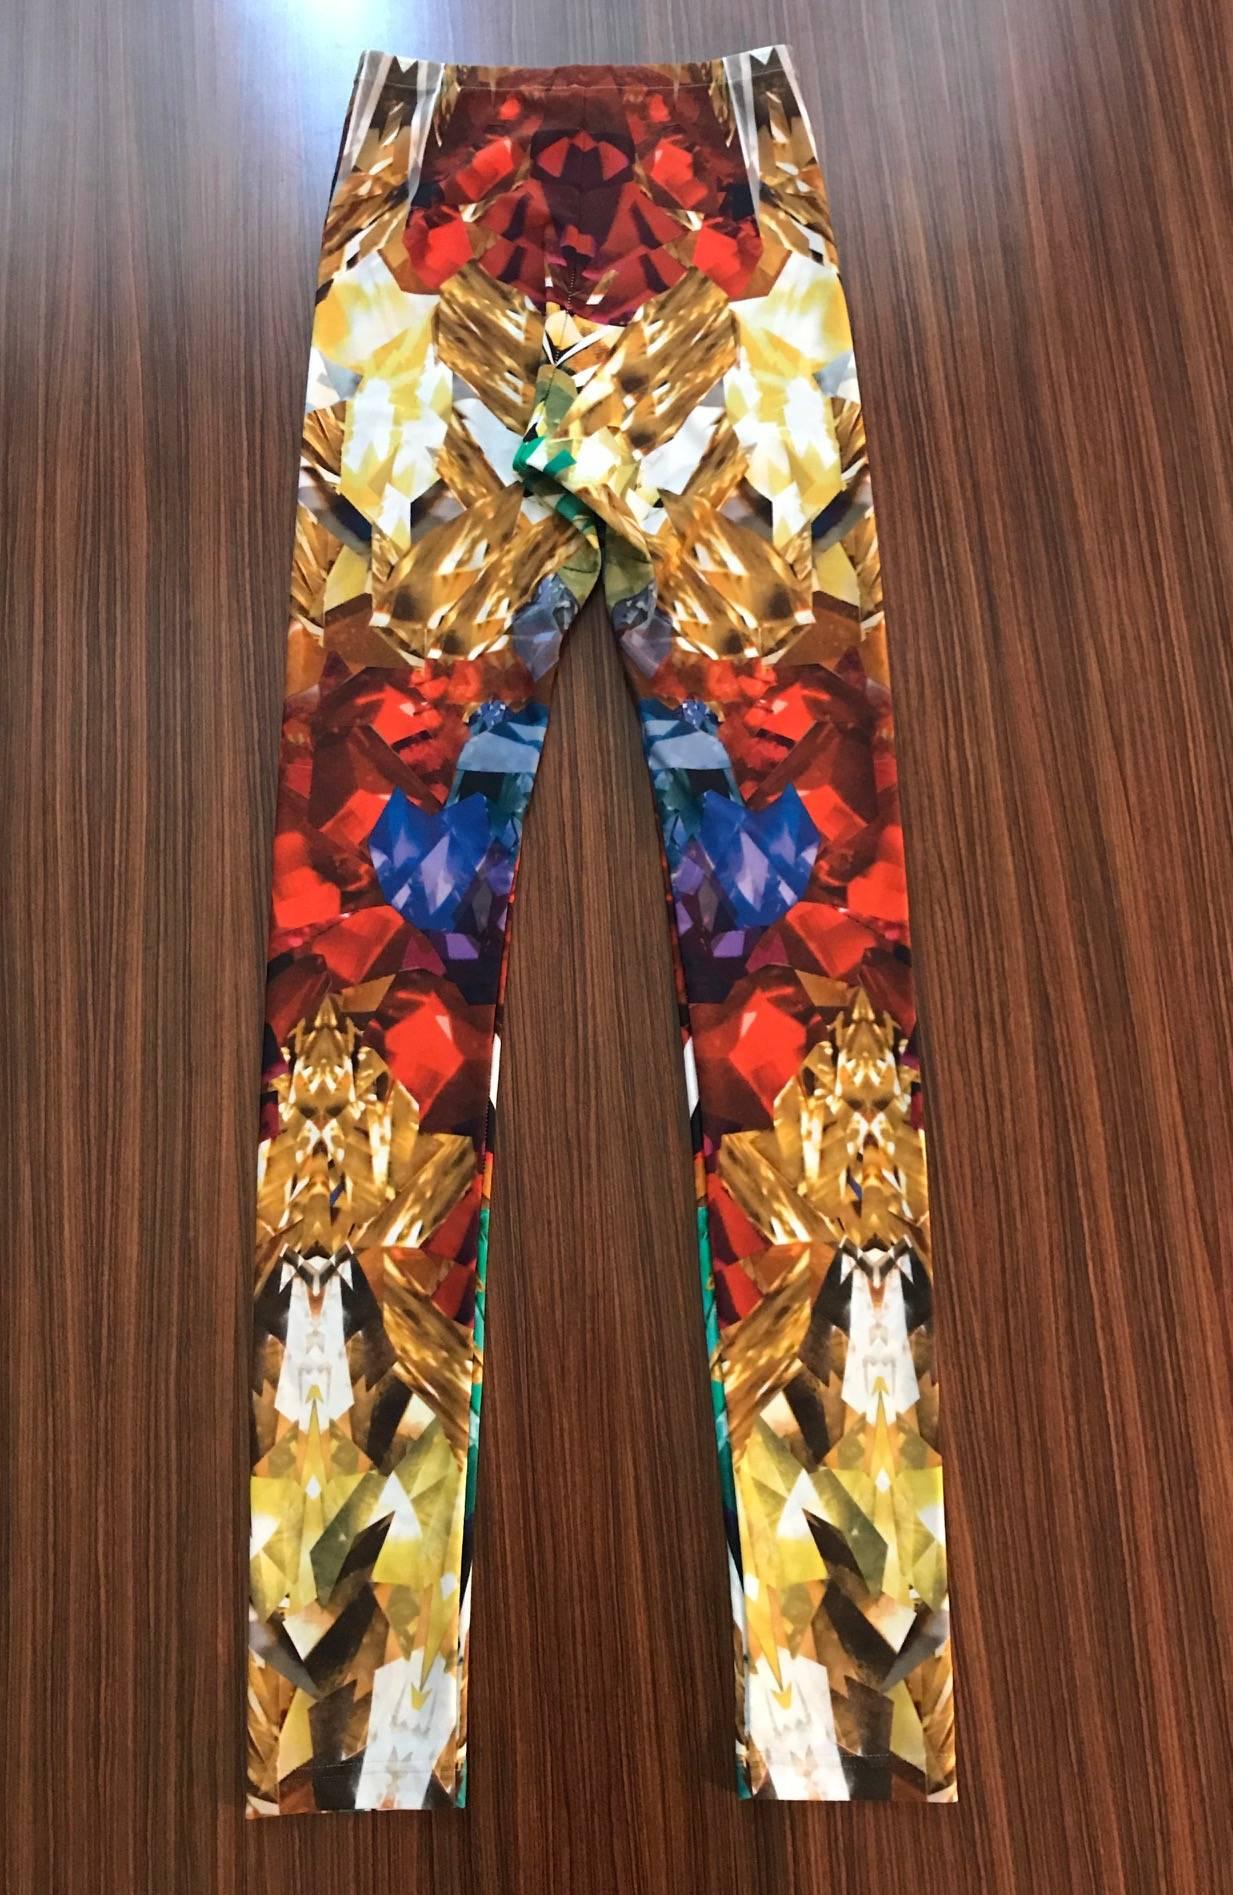 Alexander Mcqueen crystal print leggings in a kaleidoscopic pattern of green, red, blue, and gold from the Spring/Summer 2009 collection.

78% polyamide, 22% elastane. 

Made in Italy.

Size S. (Very stretchy.)
Waist 22